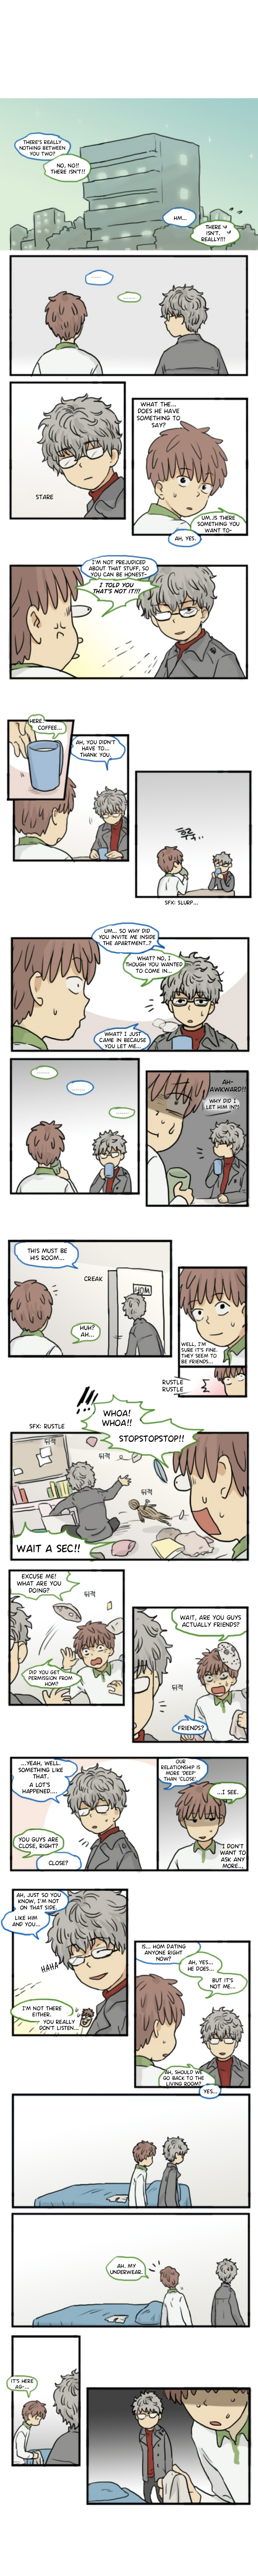 Welcome To Room #305! - Page 1